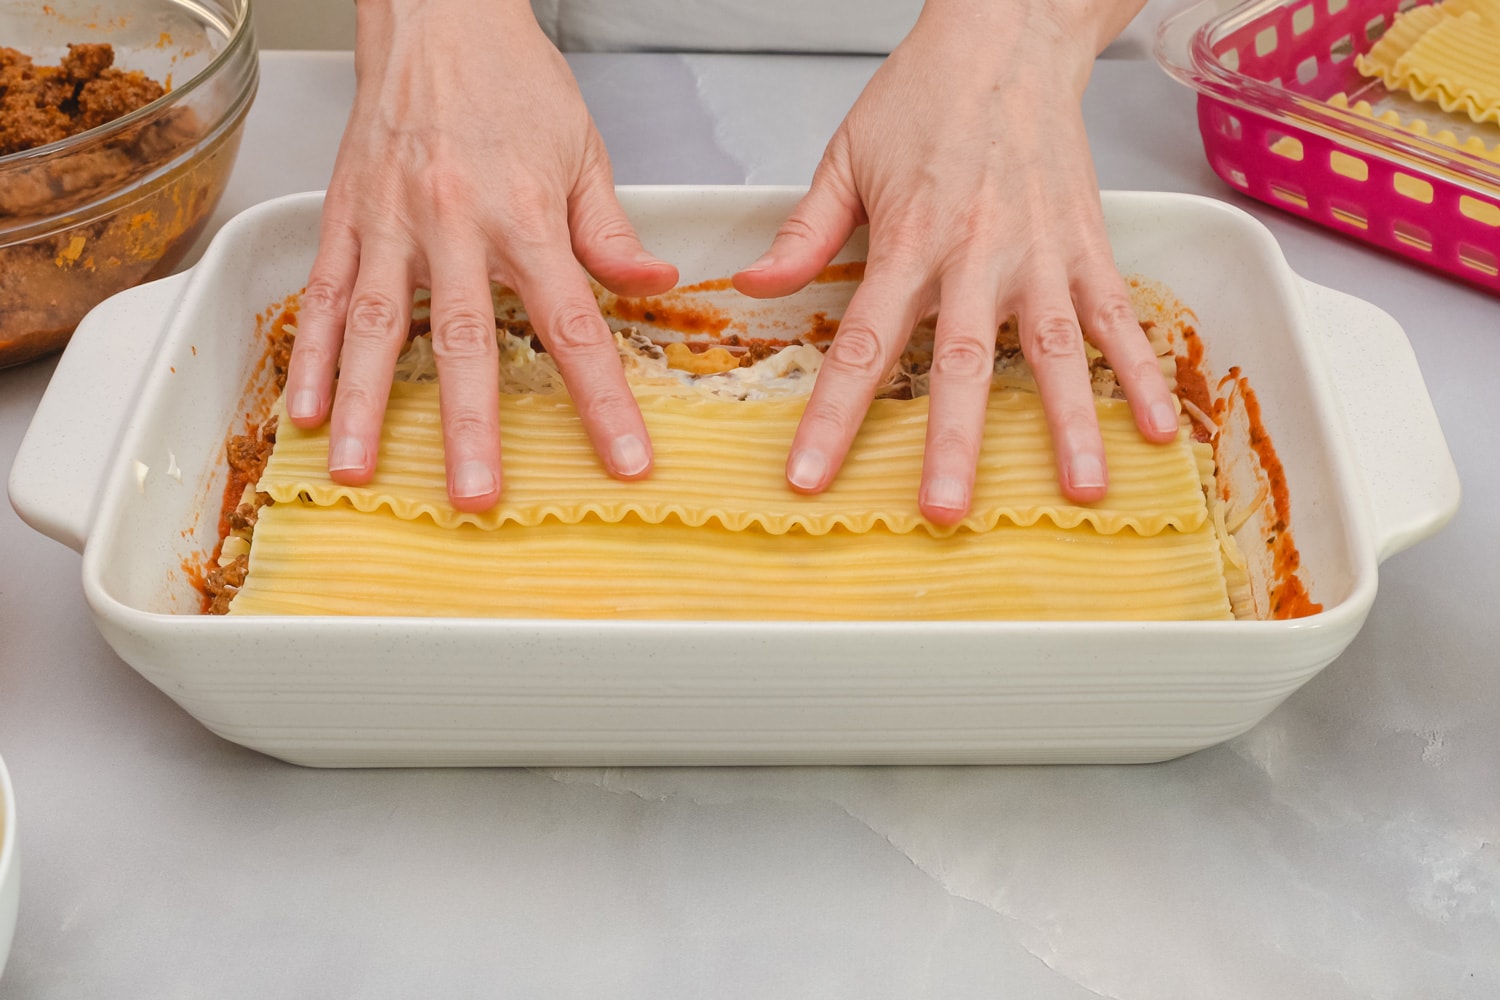 Beef lasagna step by step recipe. Layer of lasagna noodles. Close up front view, woman hands, marble kitchen table background